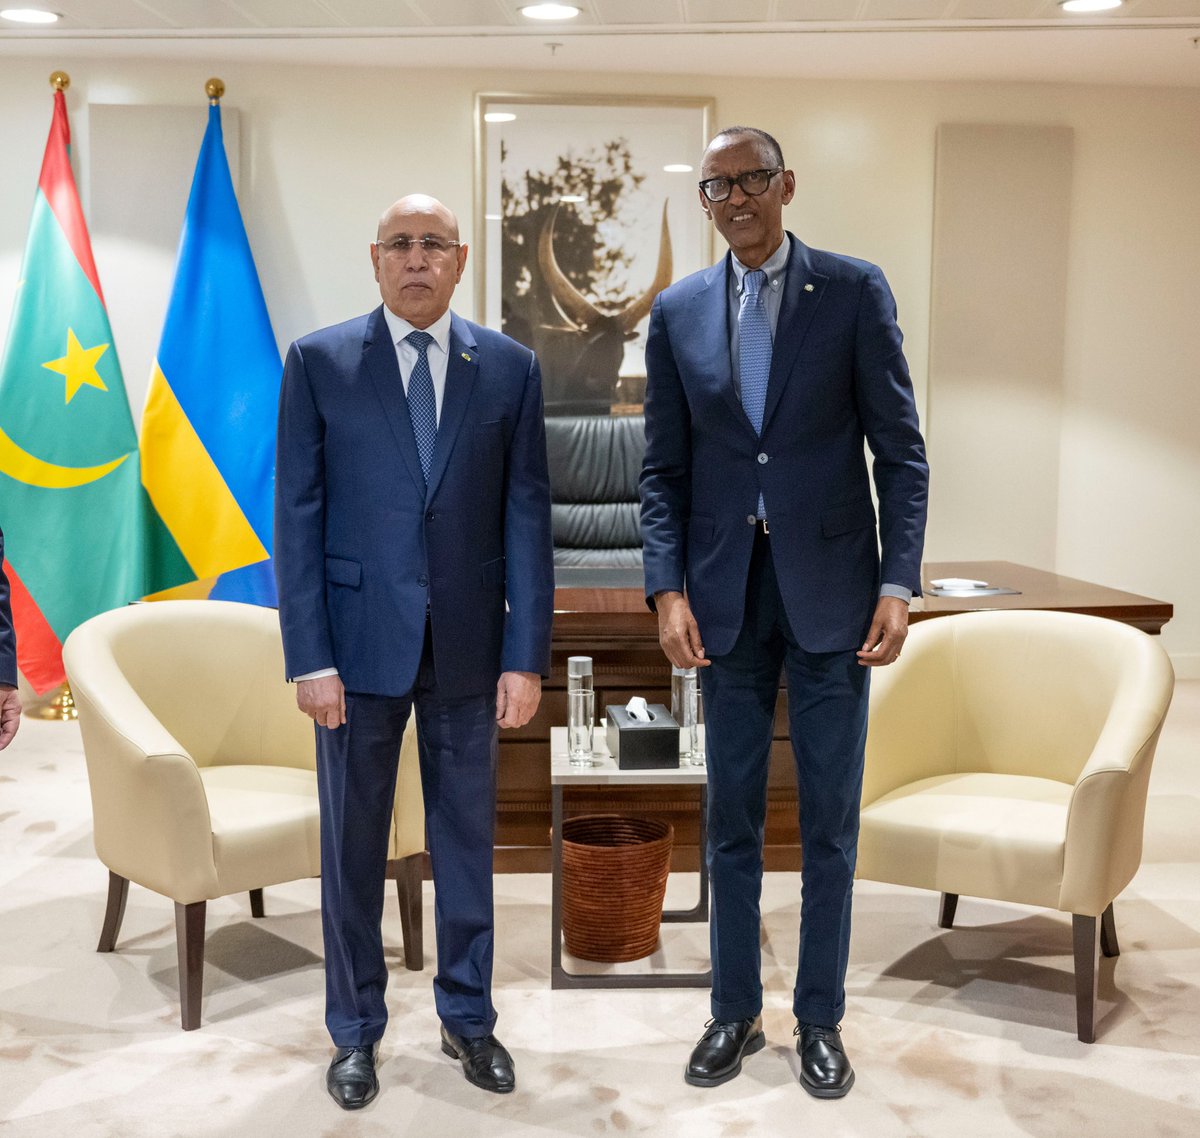 President Kagame met with H.E. Mohamed Ould Ghazouani, President of Mauritania who is in Rwanda for the 30th Commemoration of the 1994 Genocide Against the Tutsi. President Kagame congratulated President Ghazouani on his role as AU Chairperson and committed his support towards